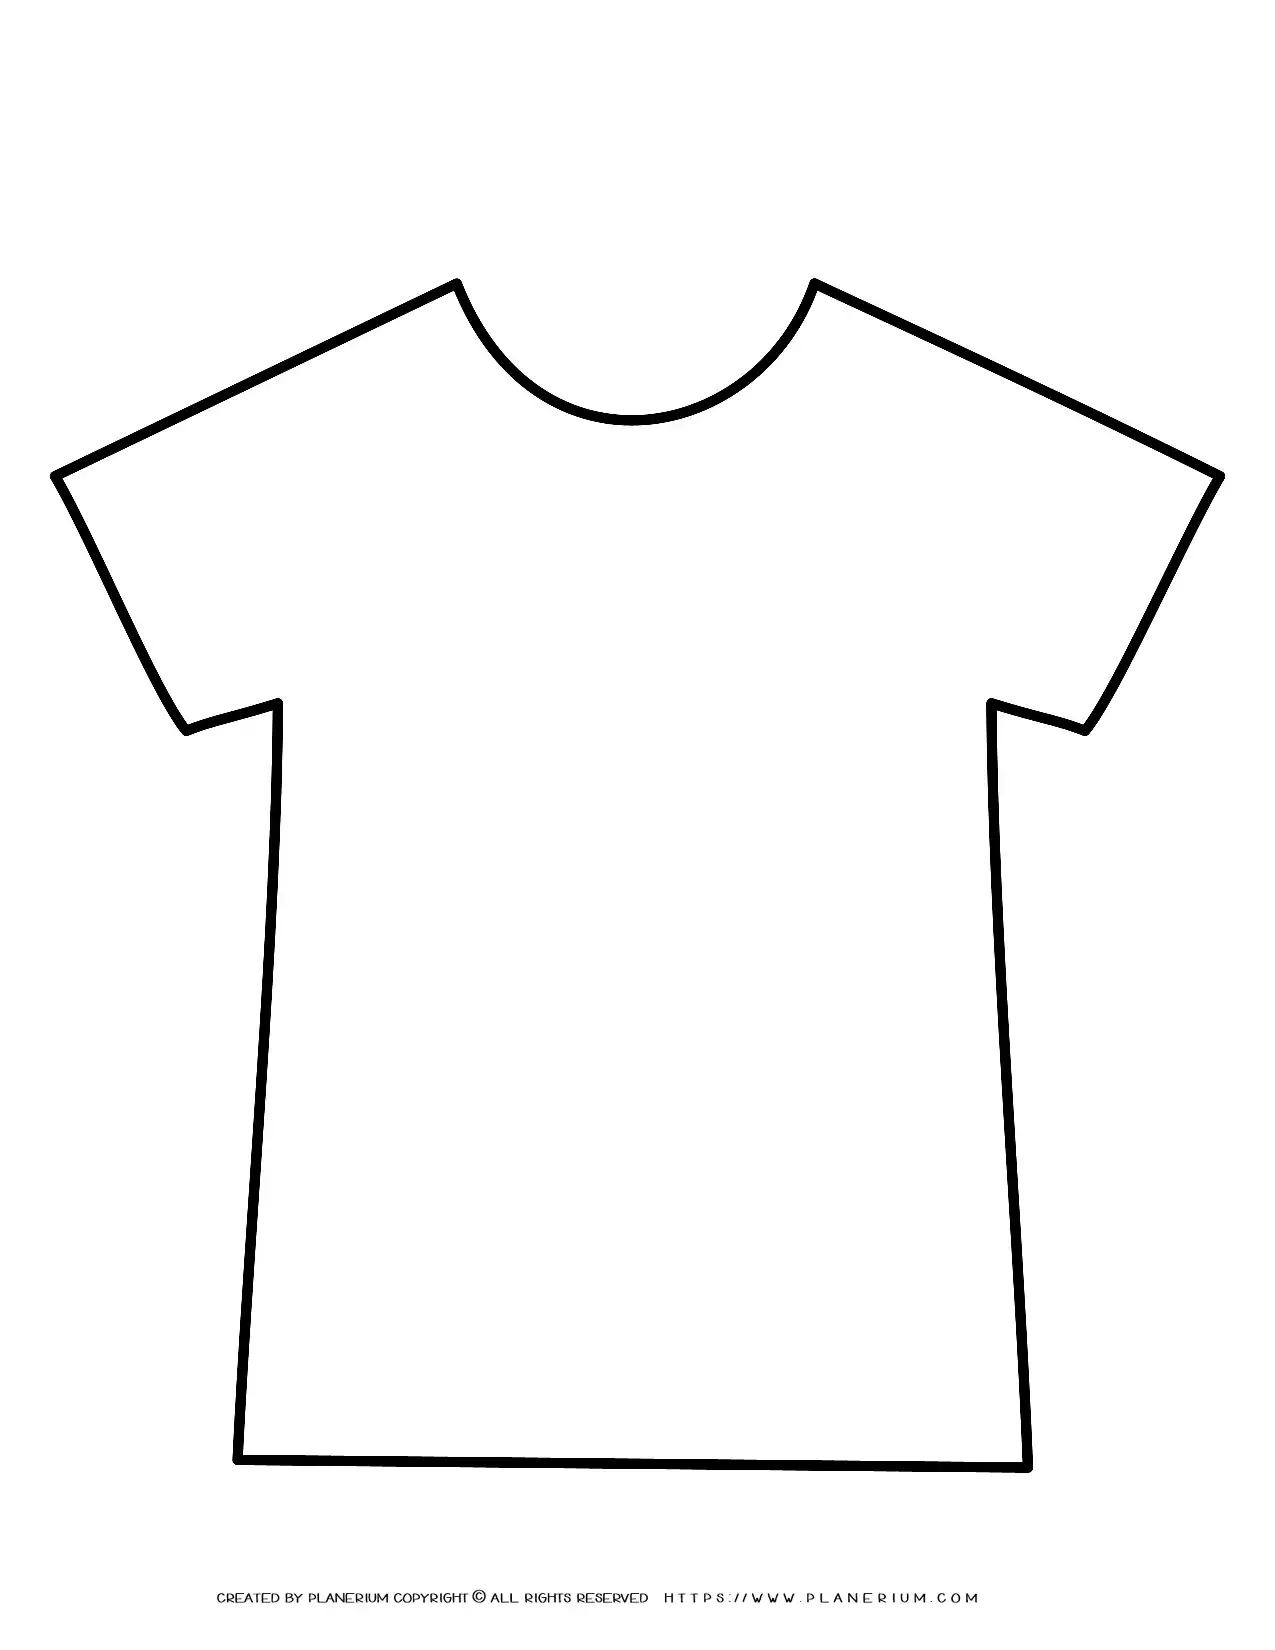 T-Shirt - FREE Printable Template  Planerium Intended For Blank Tshirt Template Printable